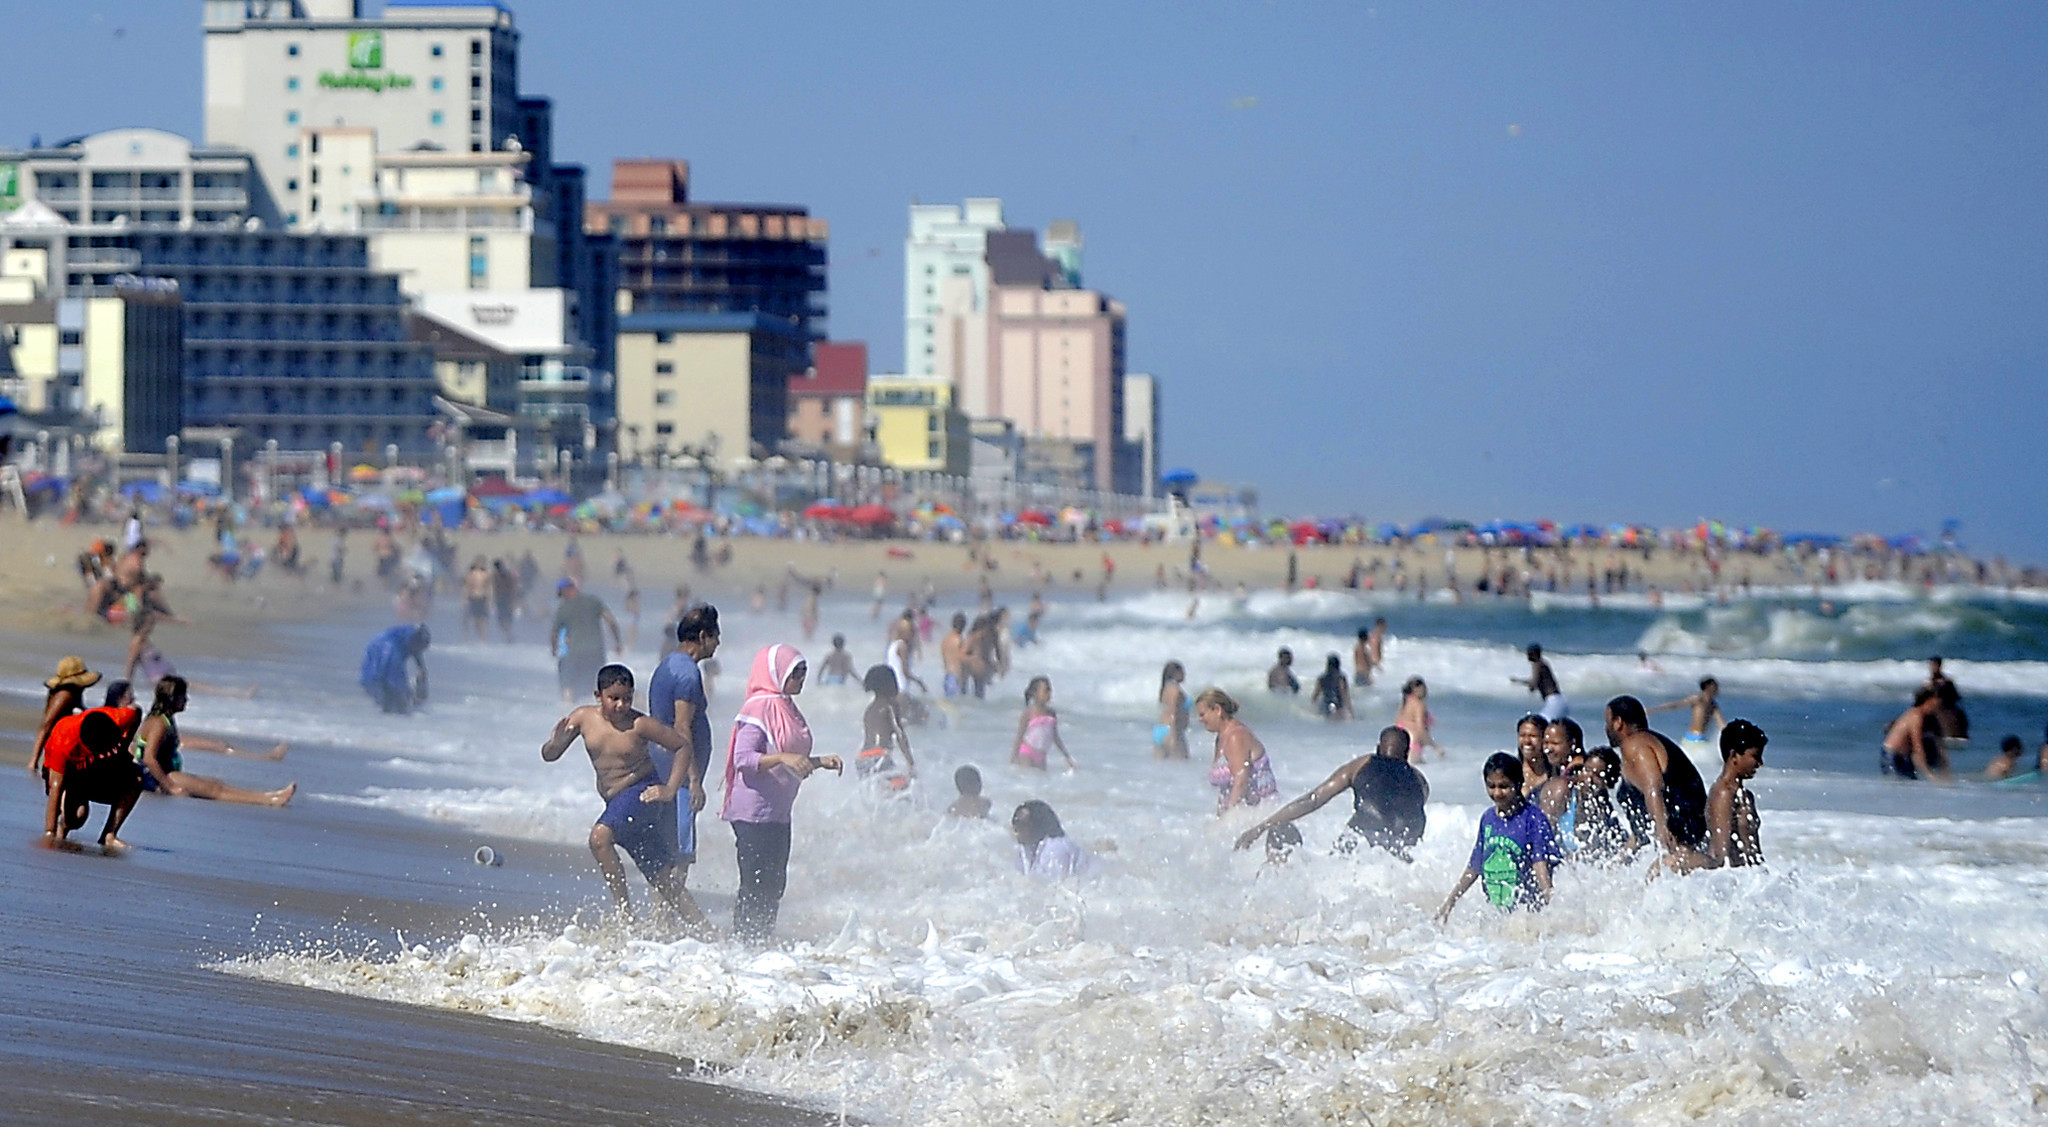 Sea lice outbreak in Ocean City, Maryland causes 